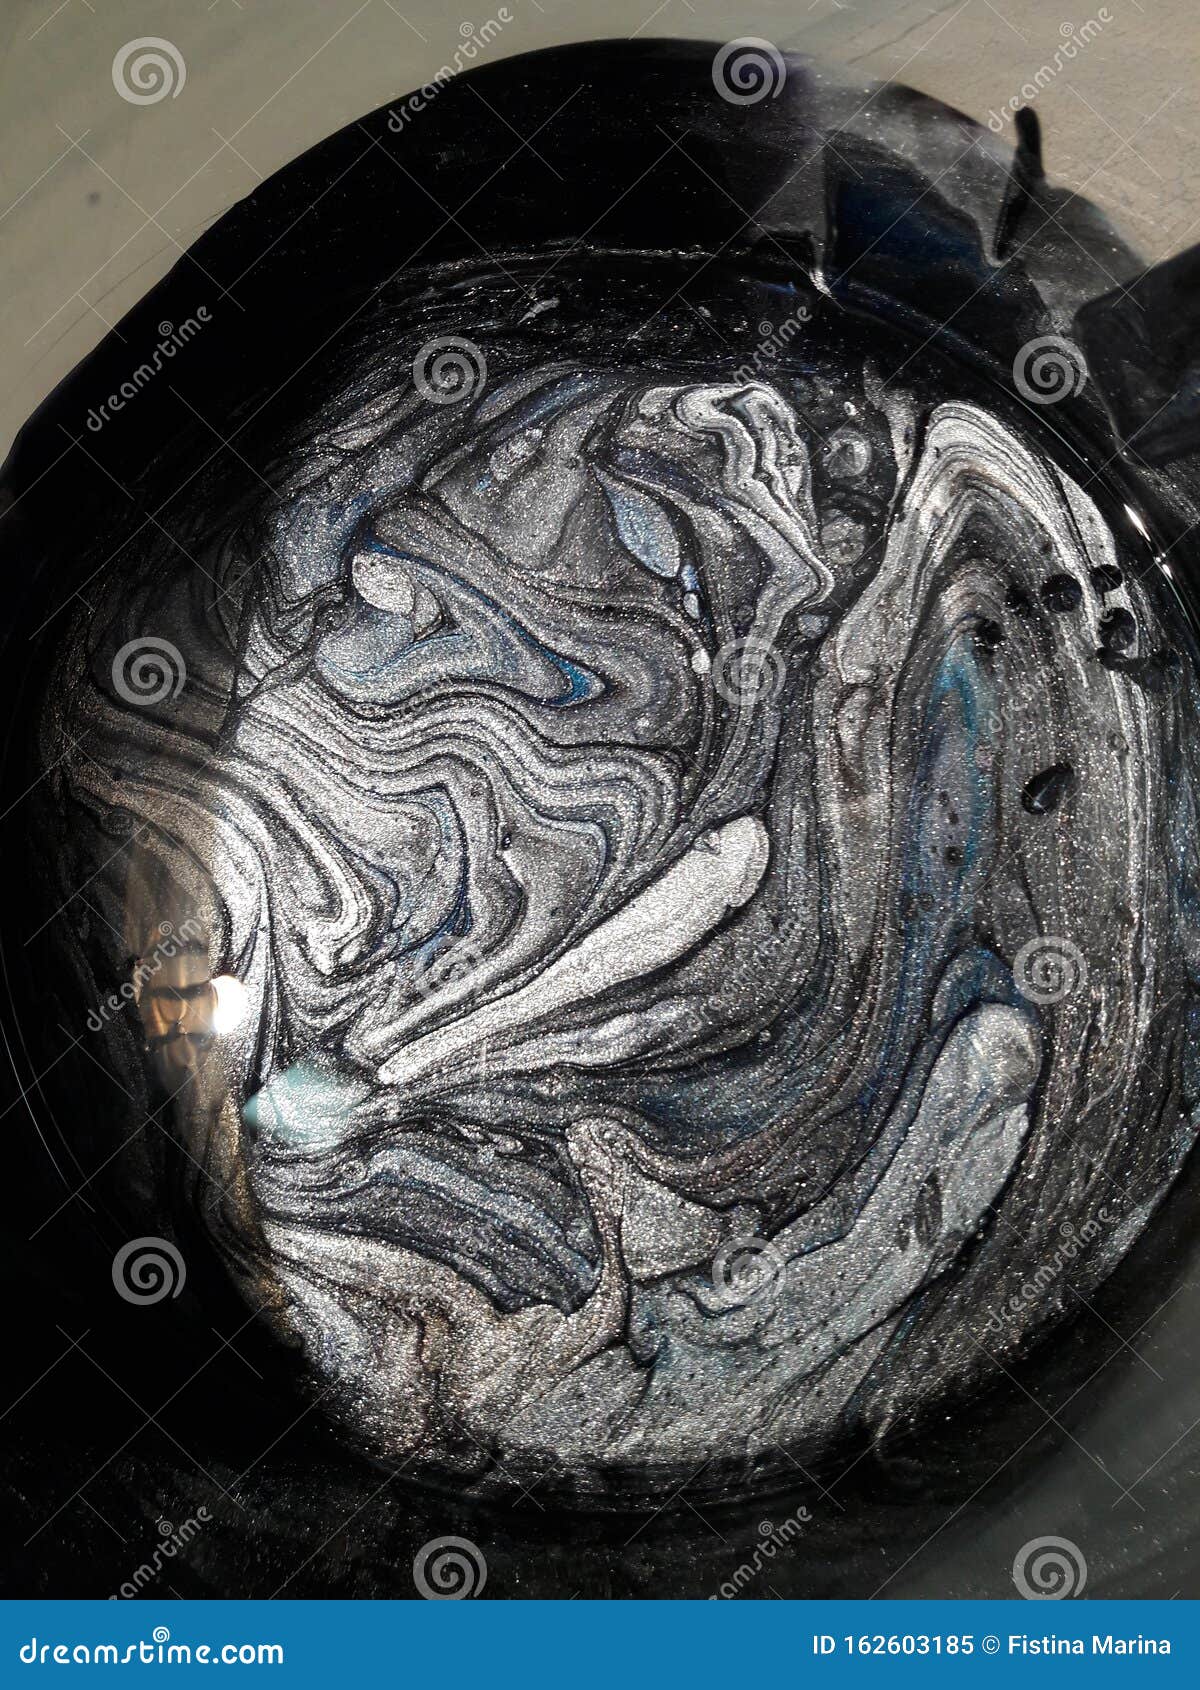 greb selvfølgelig klippe Mixing a Metal Component with Black Paint - Preparing Enamel for Painting a  Car Stock Image - Image of preparing, black: 162603185